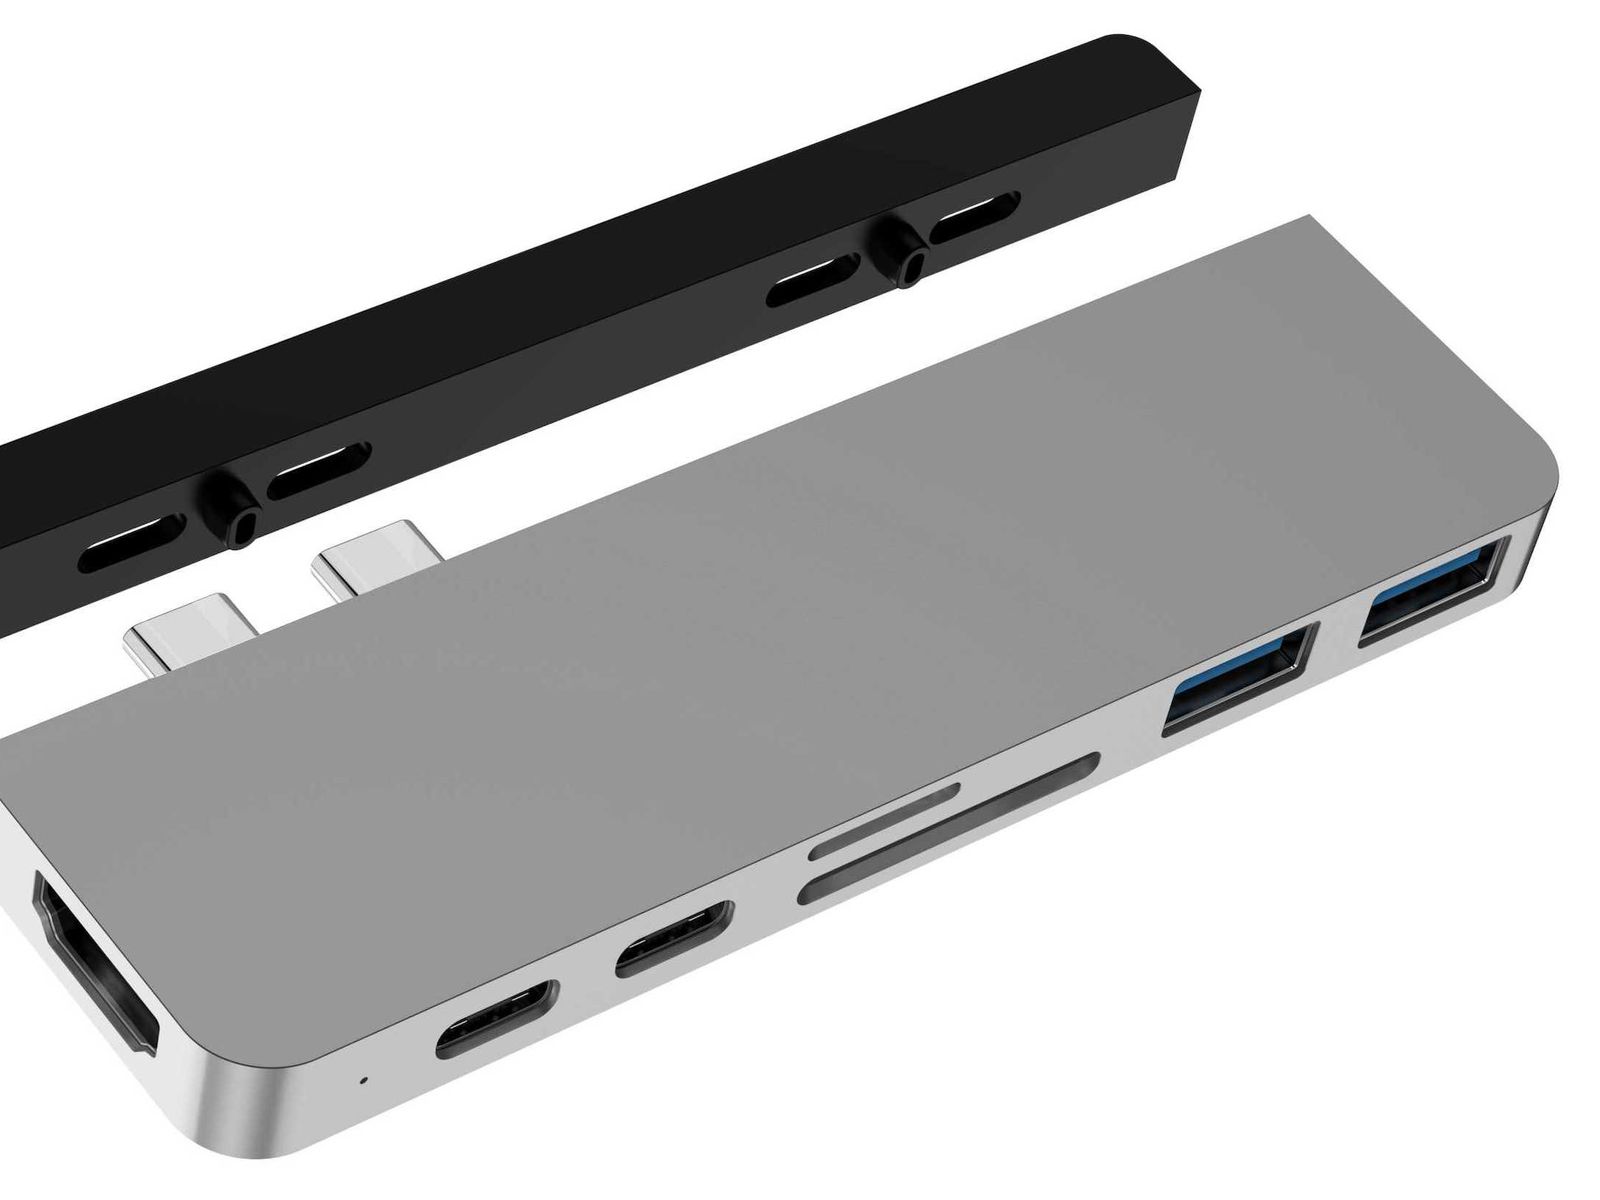 HyperDrive Dual 4K HDMI 10-in-1 USB-C Hub For M1, M2, and M3 MacBooks